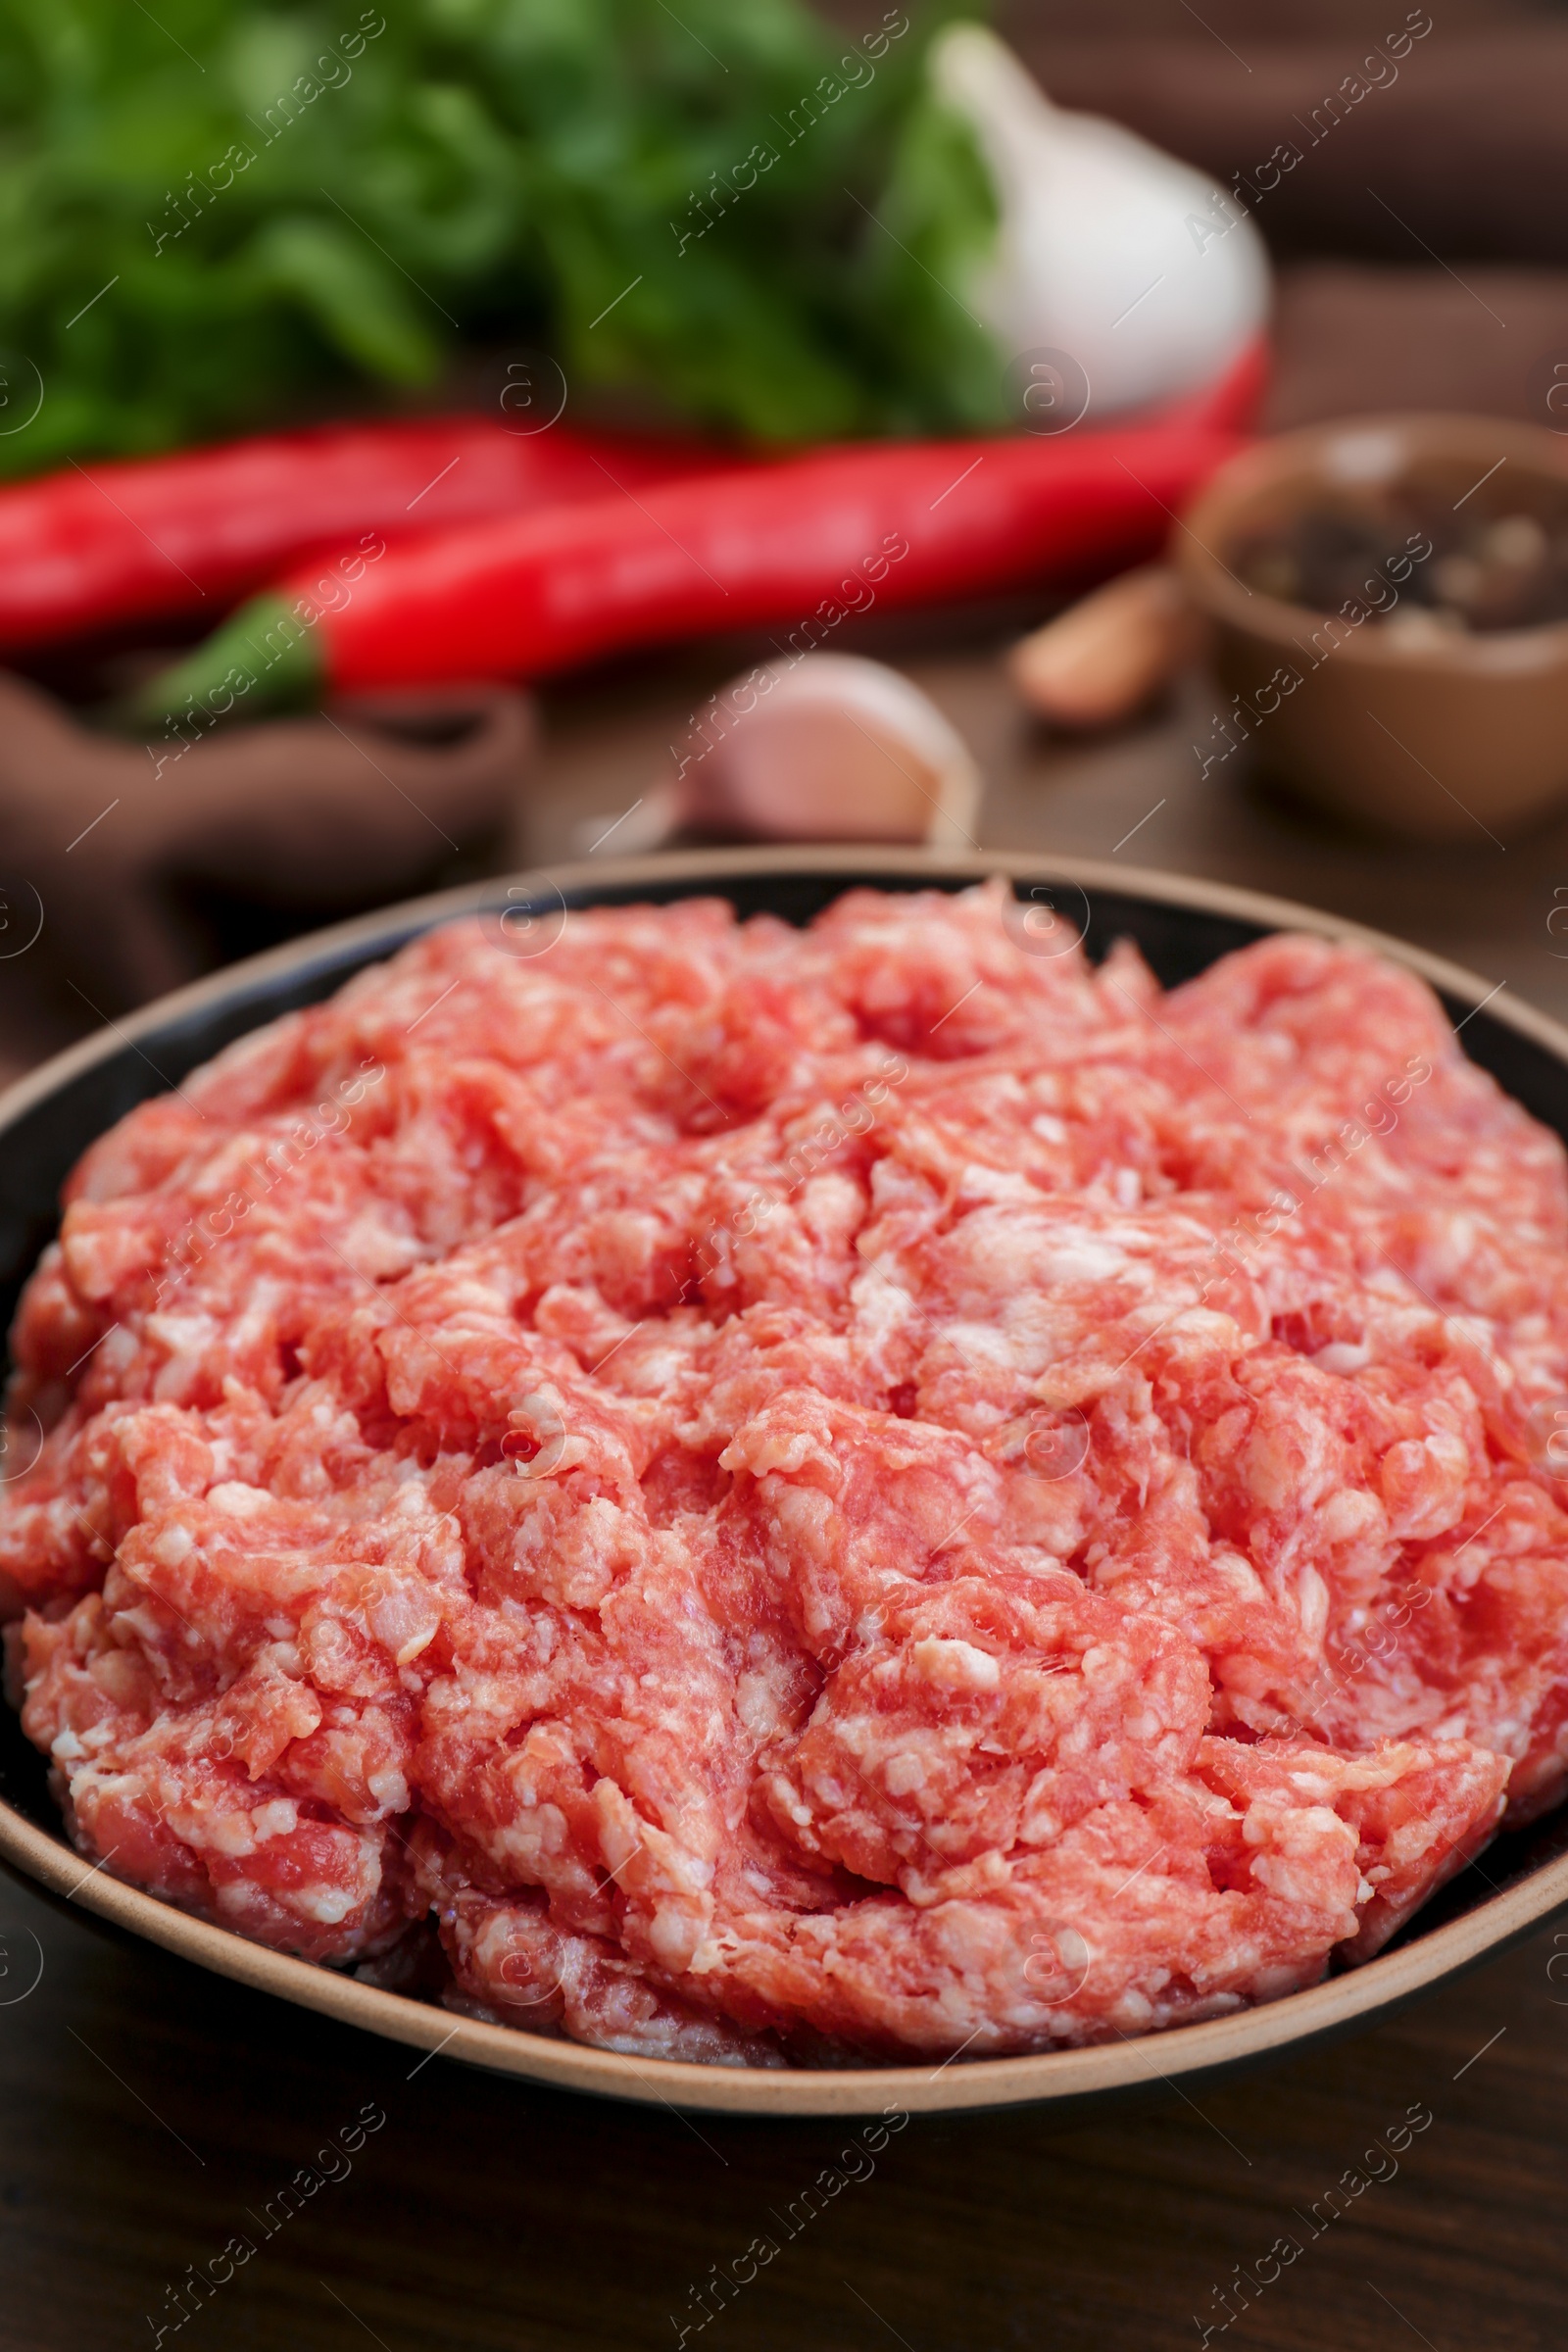 Photo of Bowl with raw fresh minced meat on wooden table, closeup